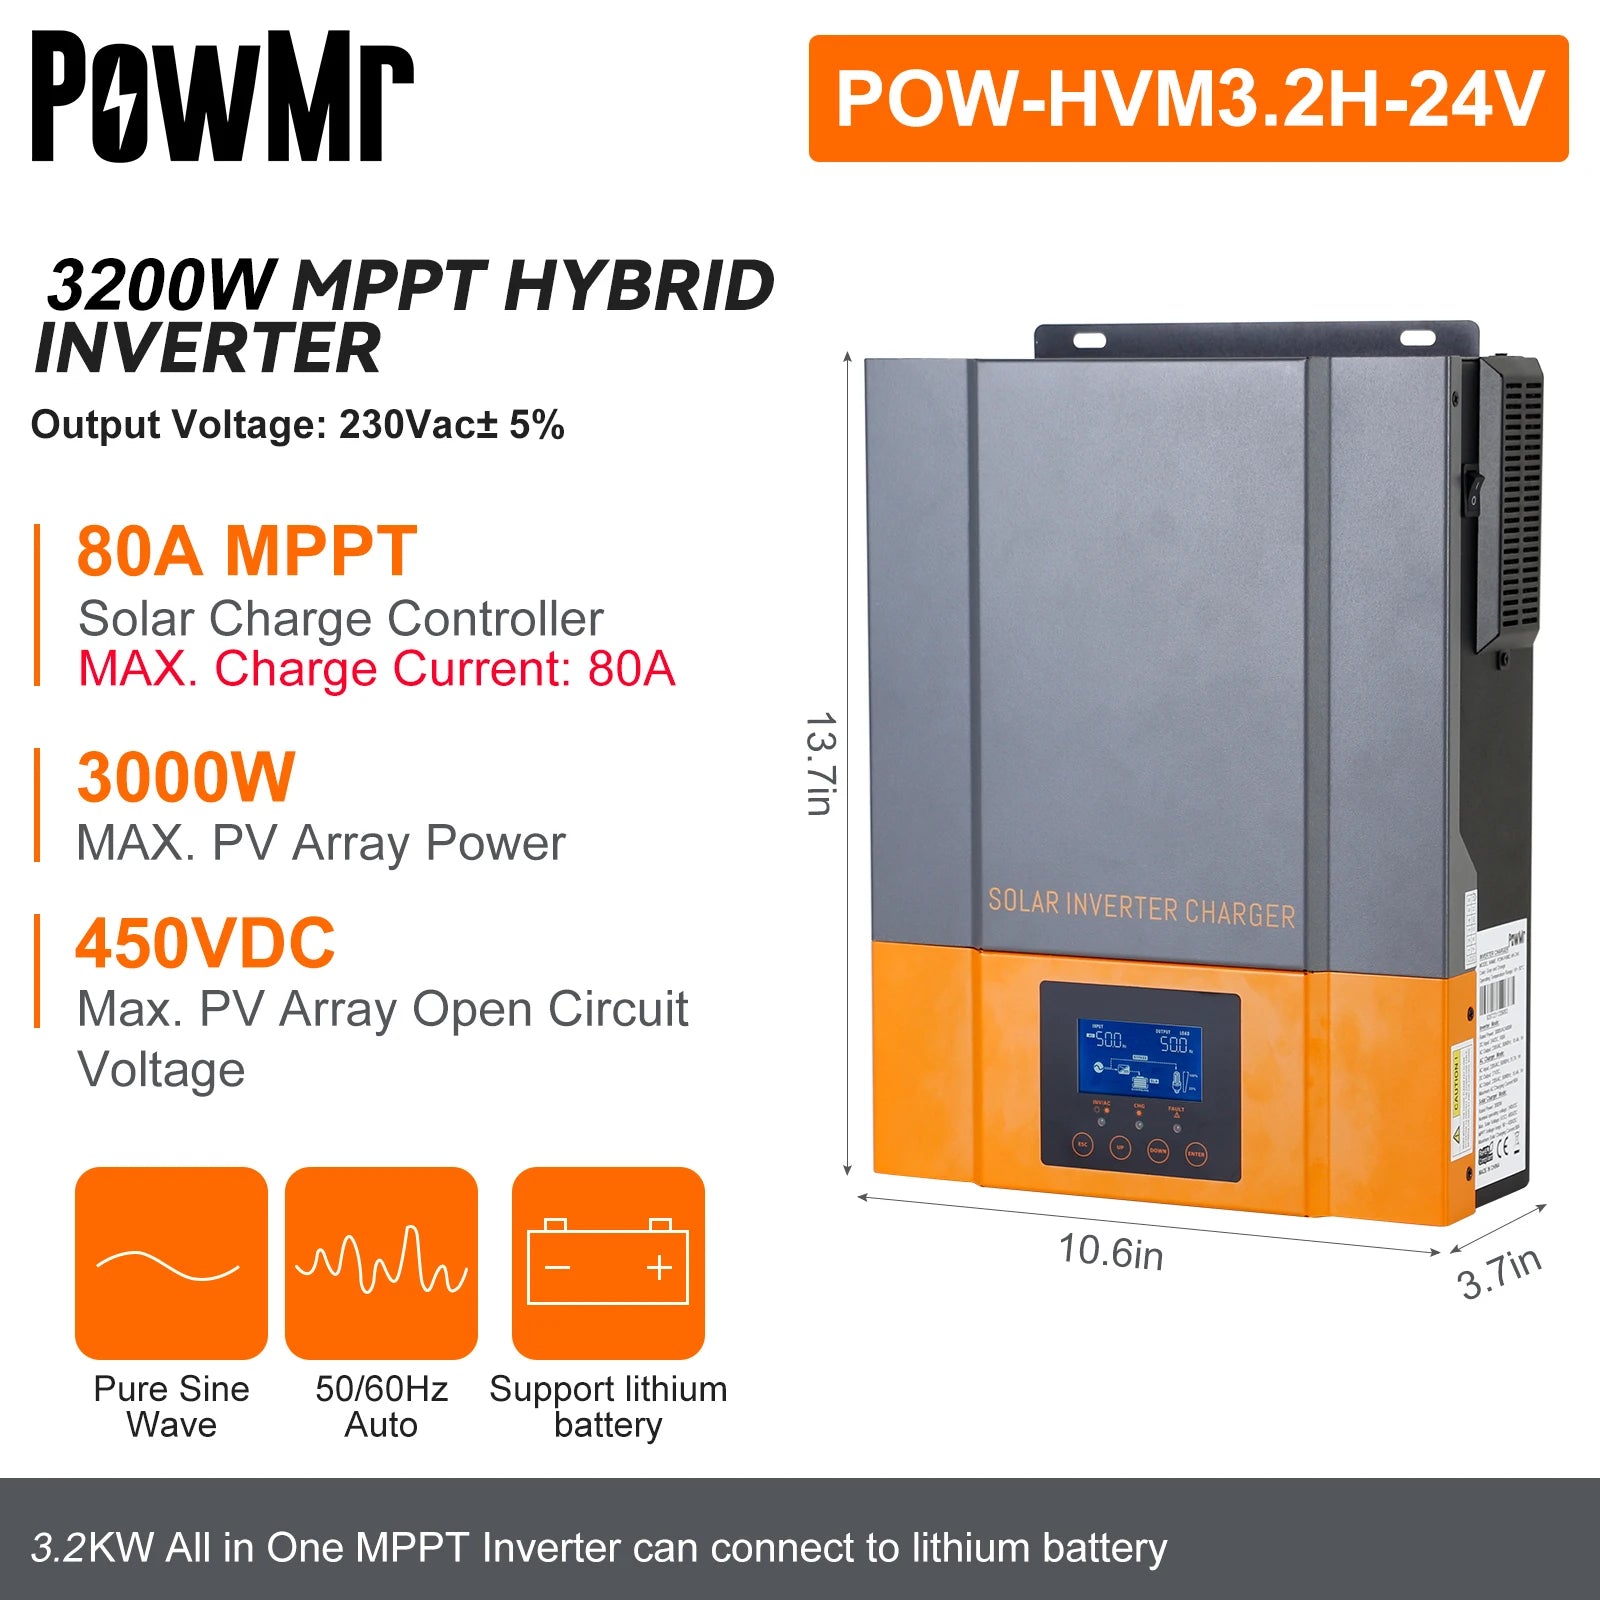 PowMr 3.2KW Hybrid Solar Inverter, Converts solar panel DC power to AC with 3200W output, charges lithium-ion batteries.